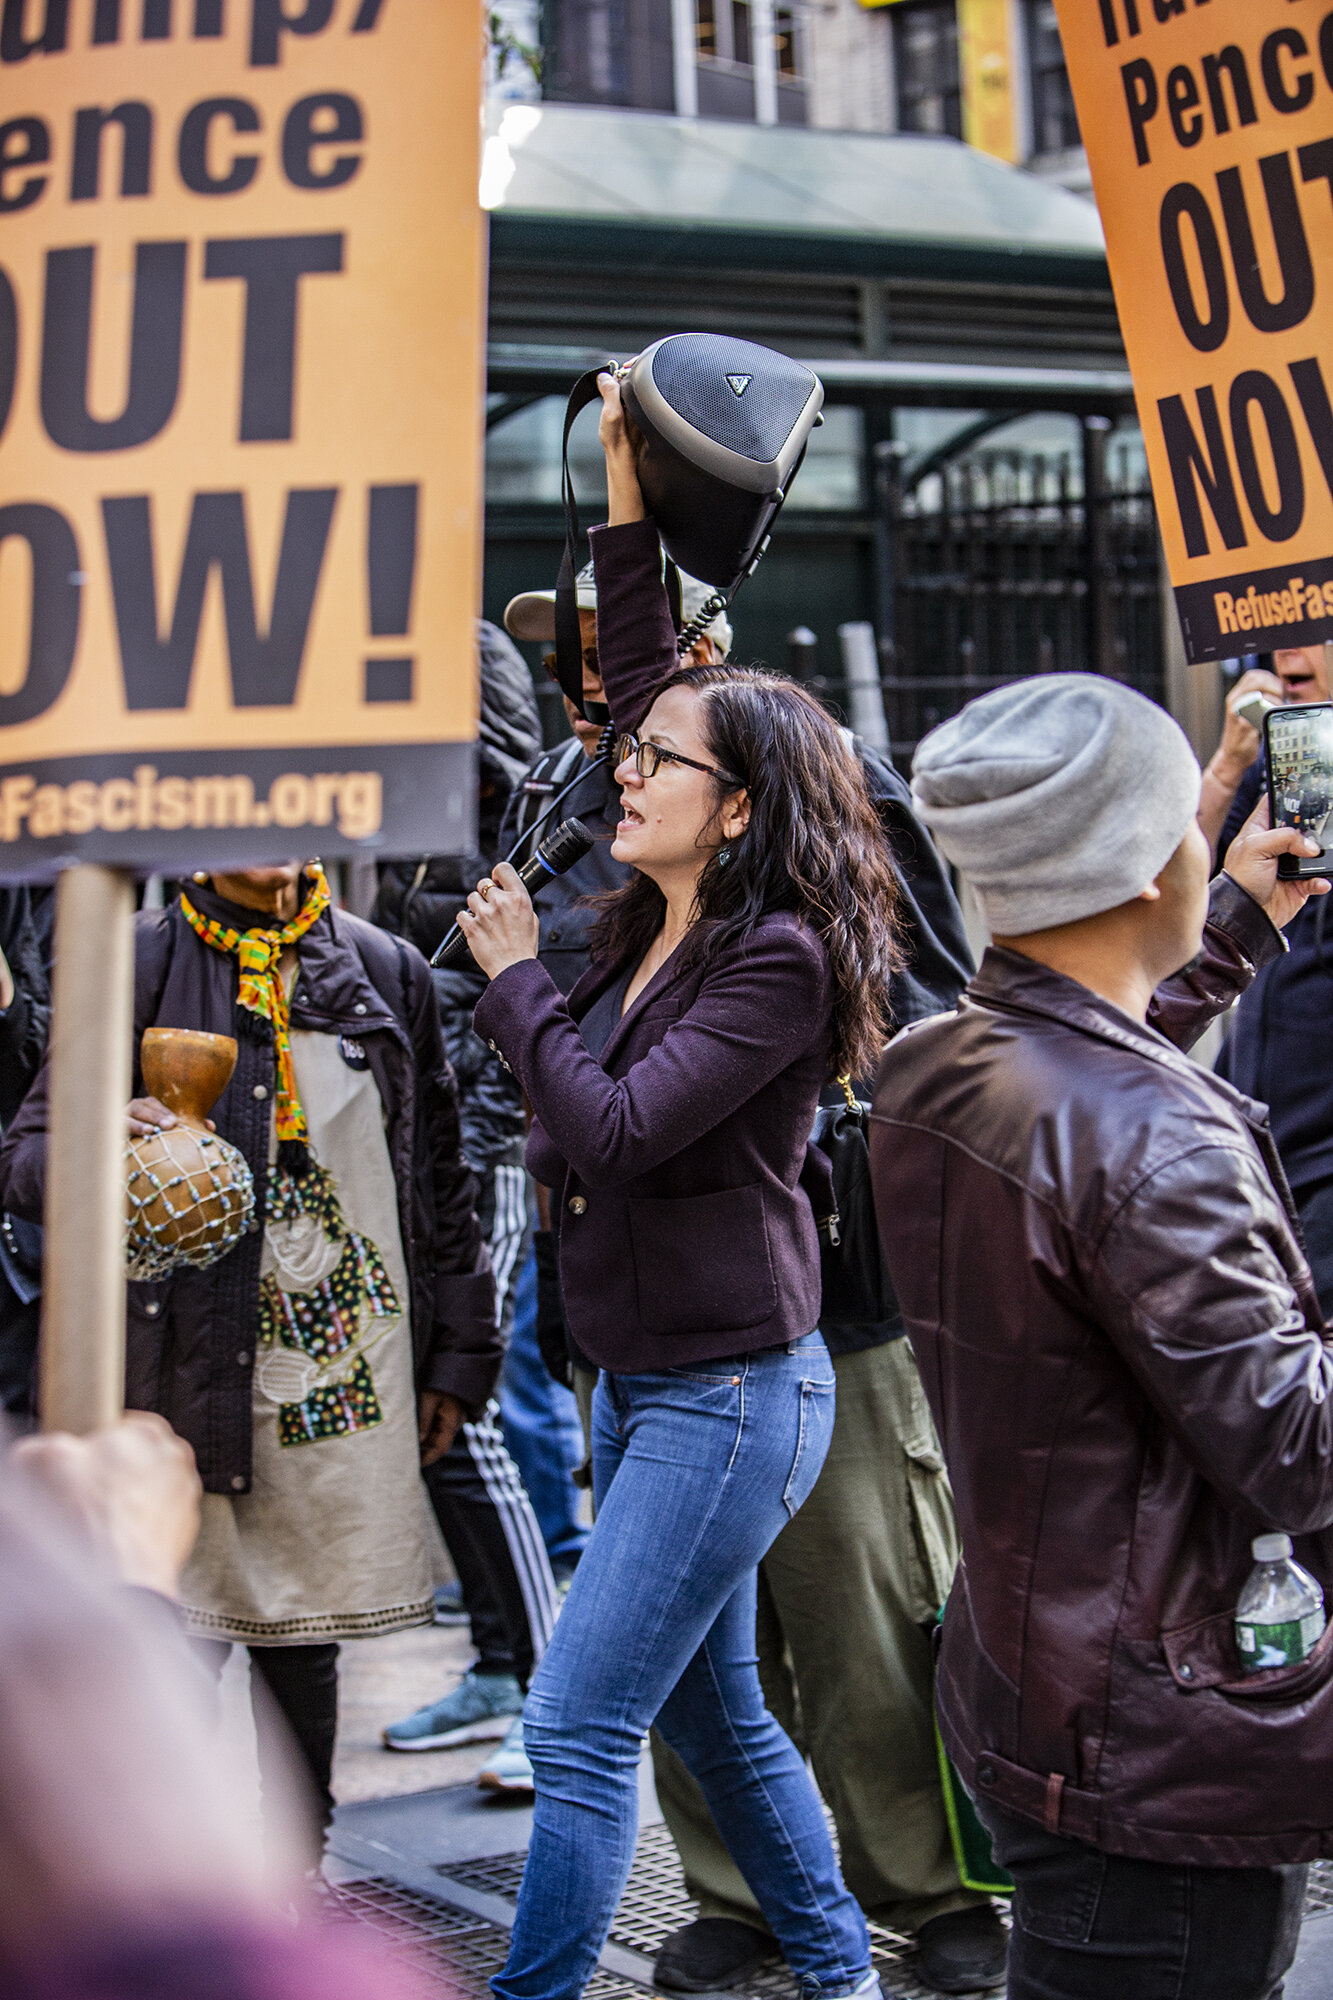 OUTNOW_Protest_2019_NYC-1067.jpg